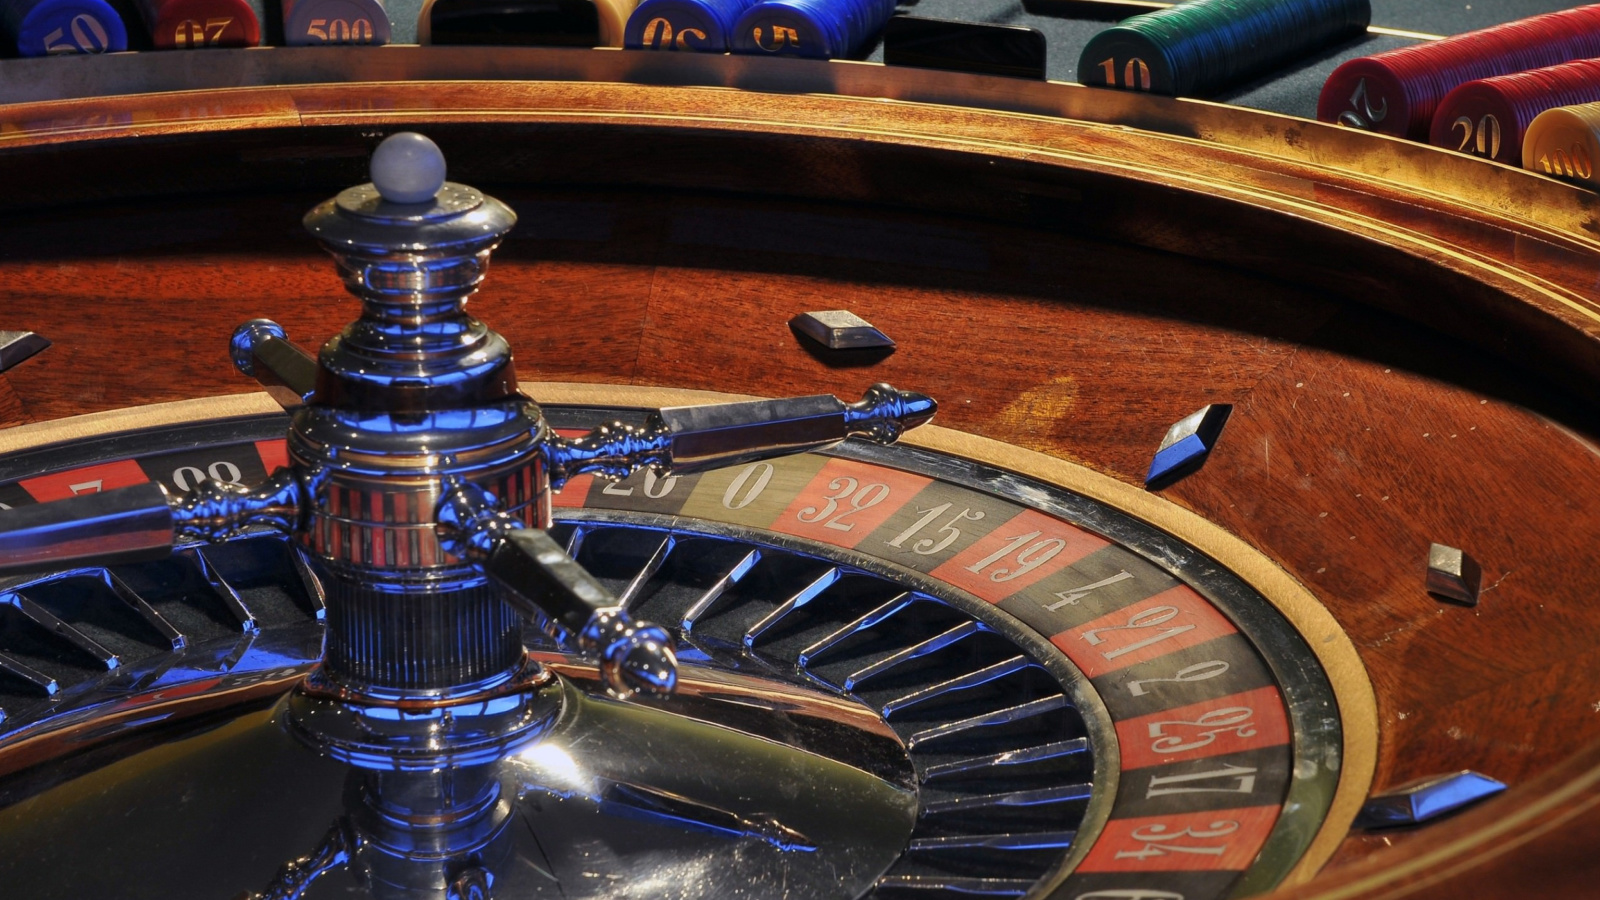 Roulette in Casino not Online Game screenshot #1 1600x900